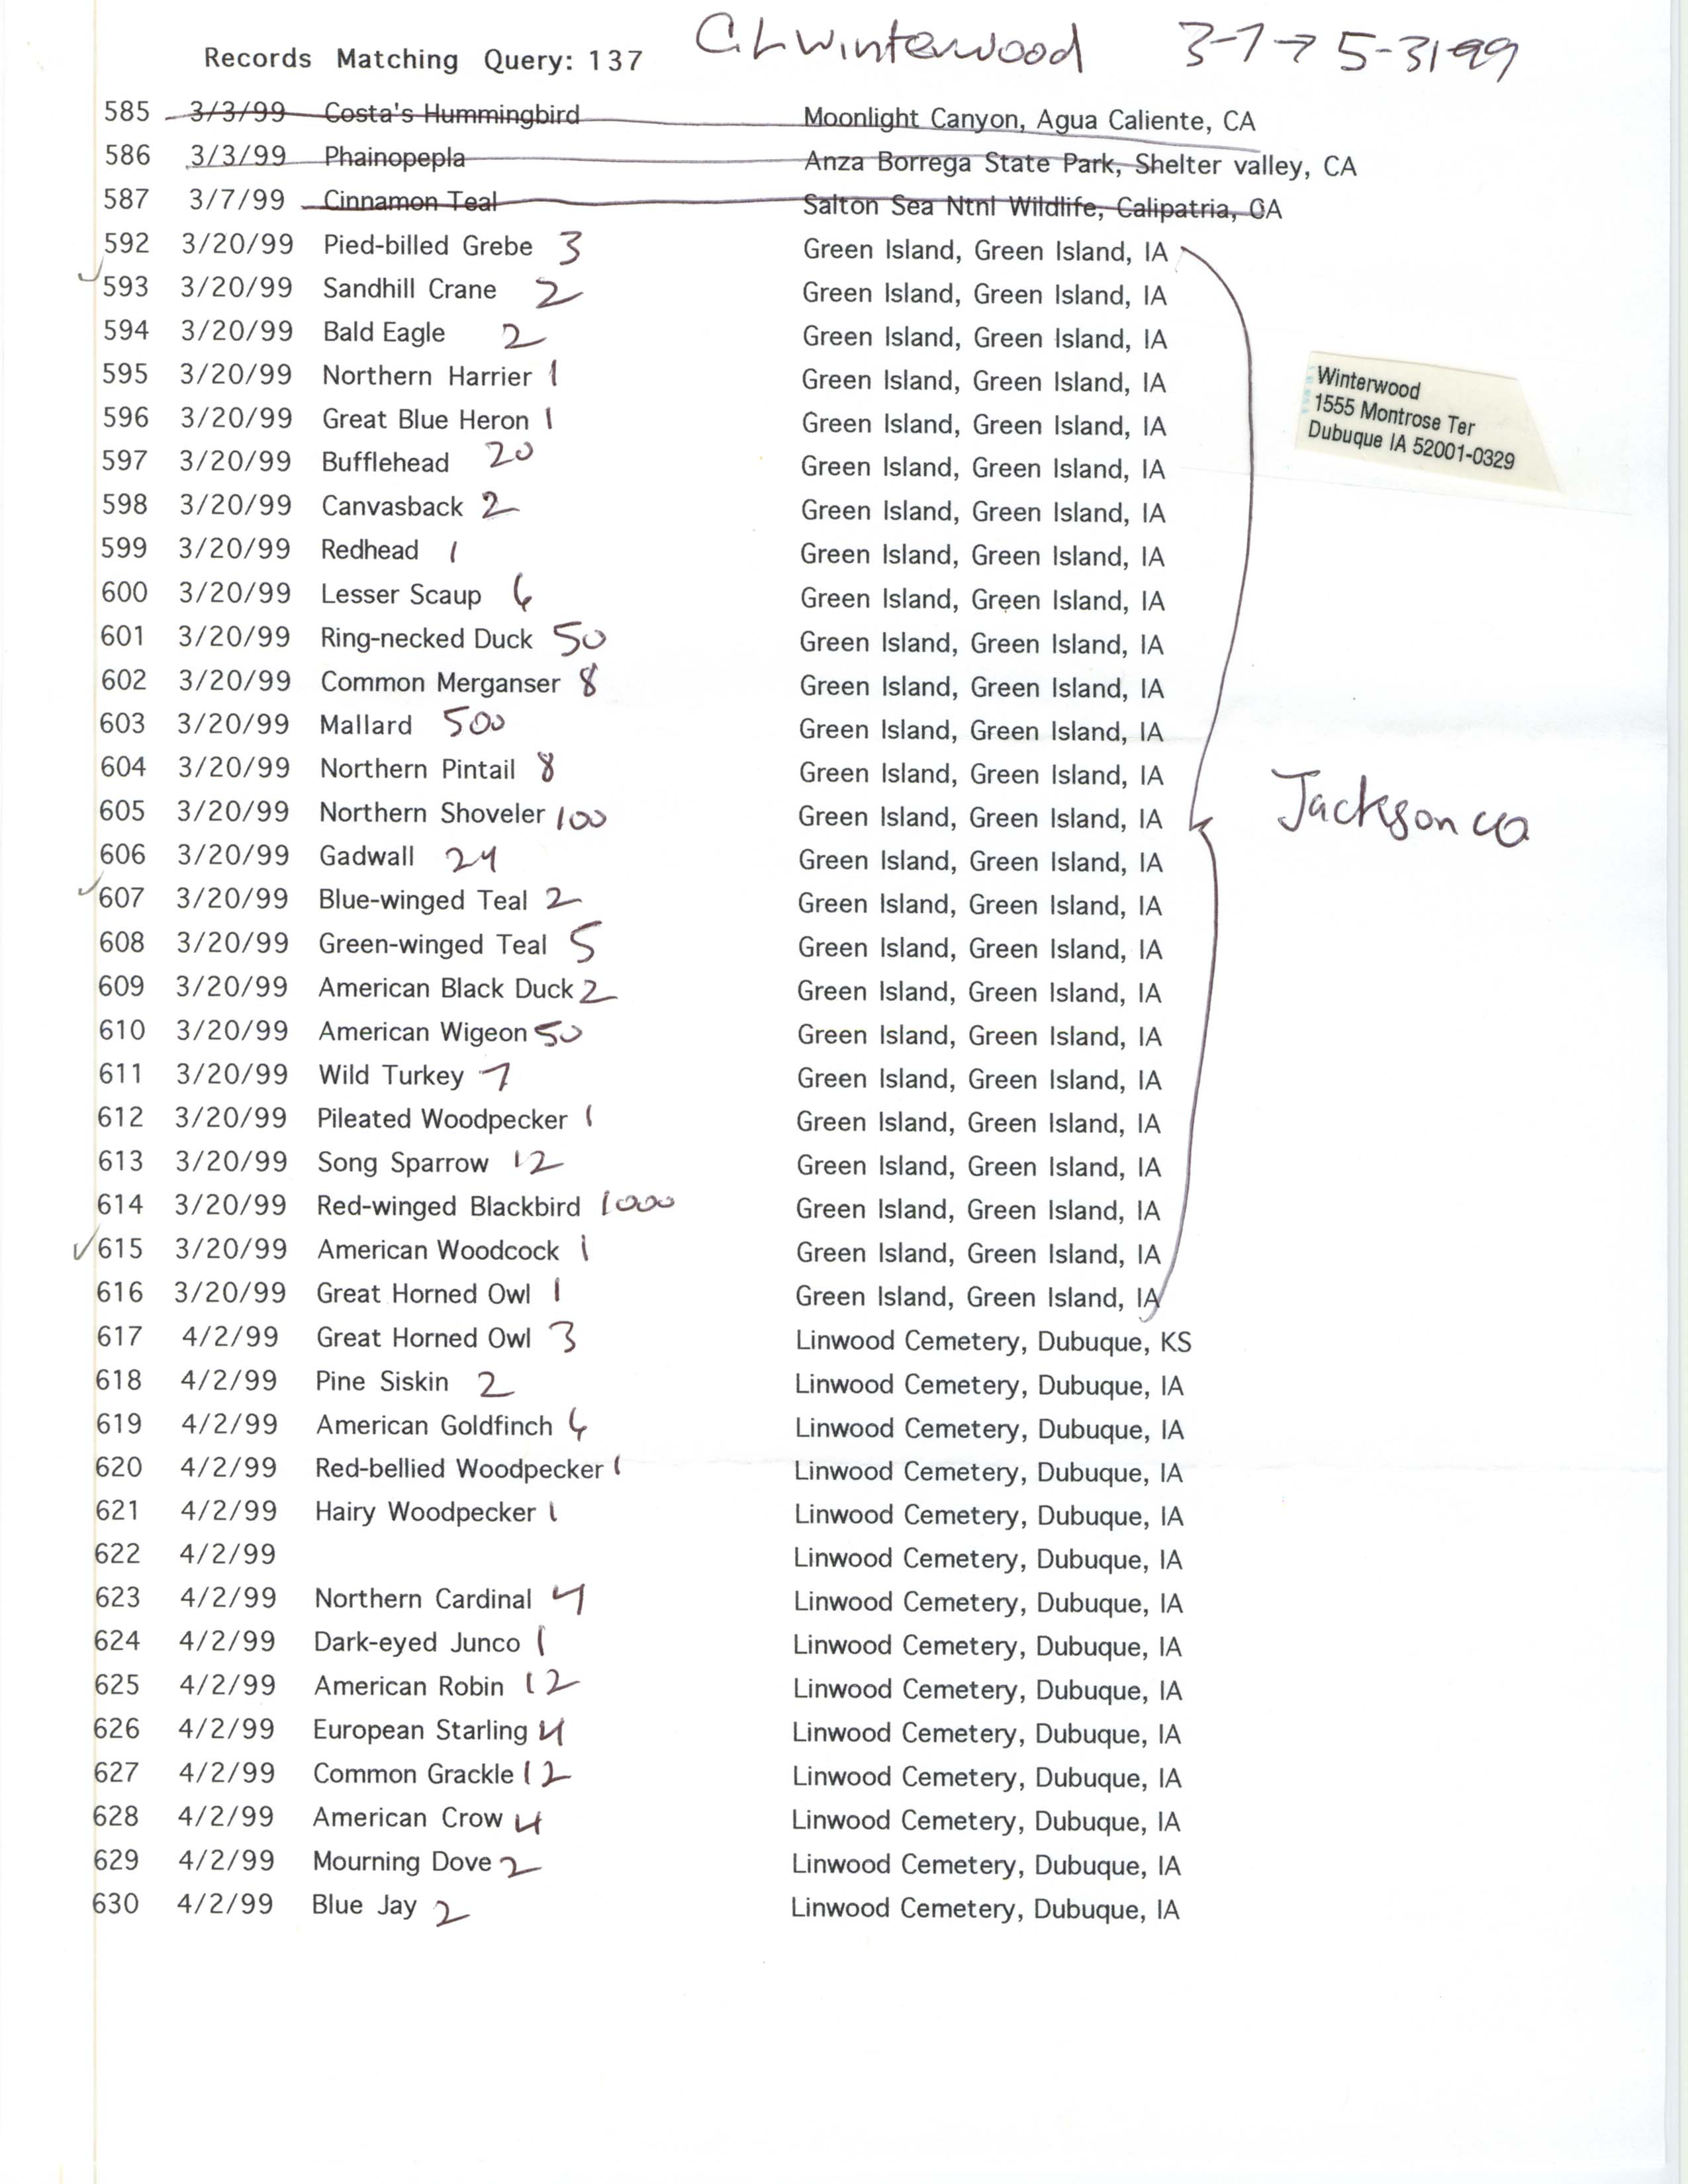 Annotated bird sighting list for spring 1999 compiled by Charles Winterwood